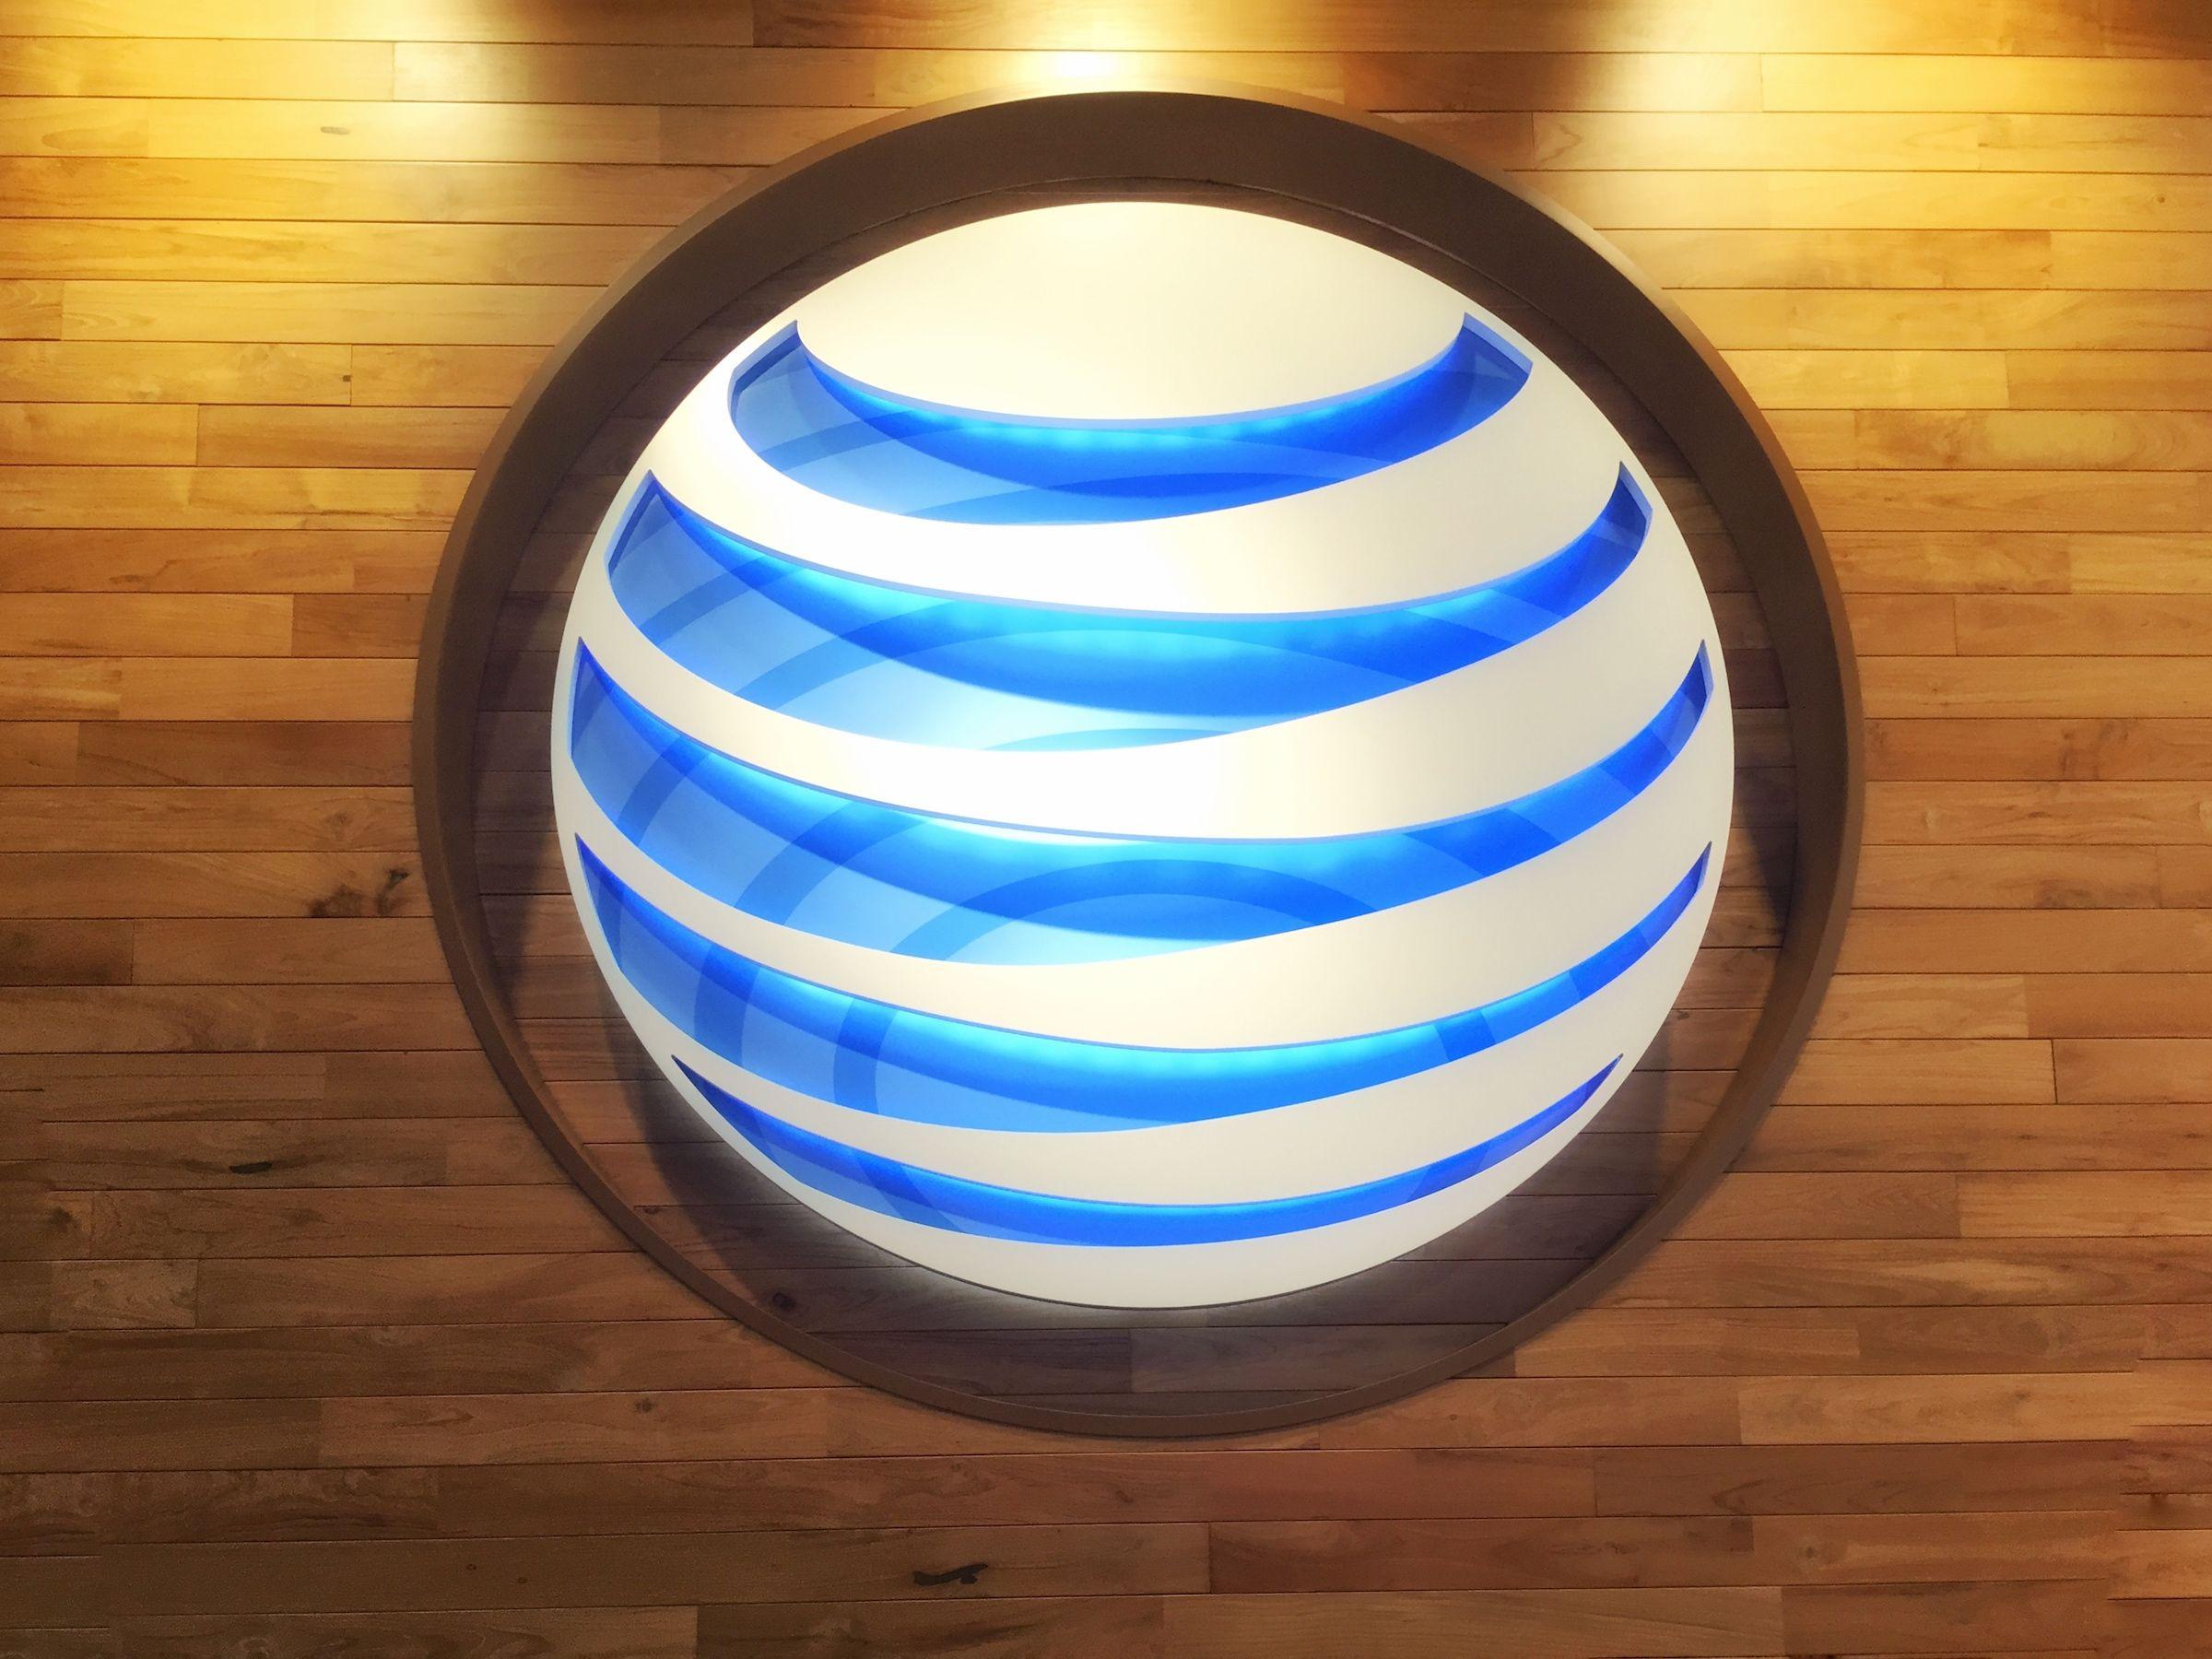 New AT&T Logo - AT&T to throttle streaming video next year with new 'Stream Saver